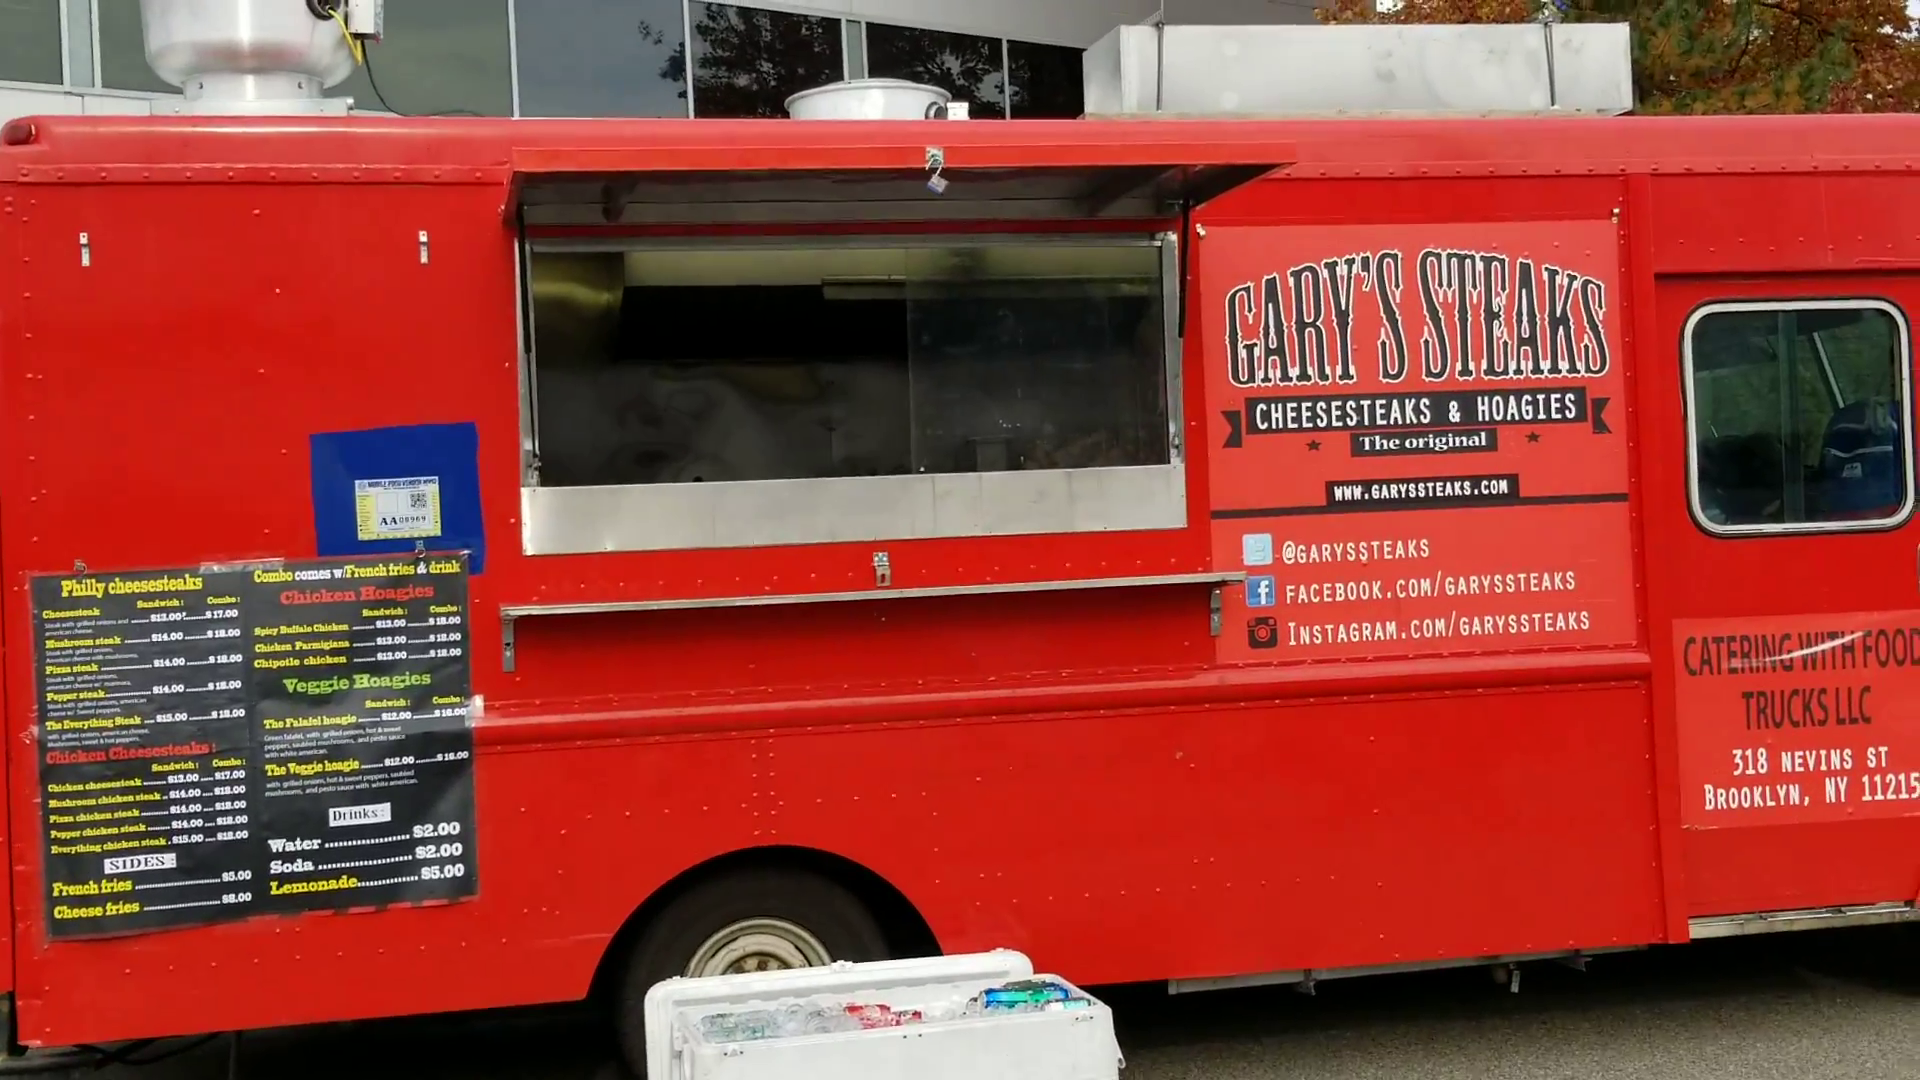 Garyssteaks TV catering food truck at the NBC universal facility in NJ for the CNBC TV Channel 5k